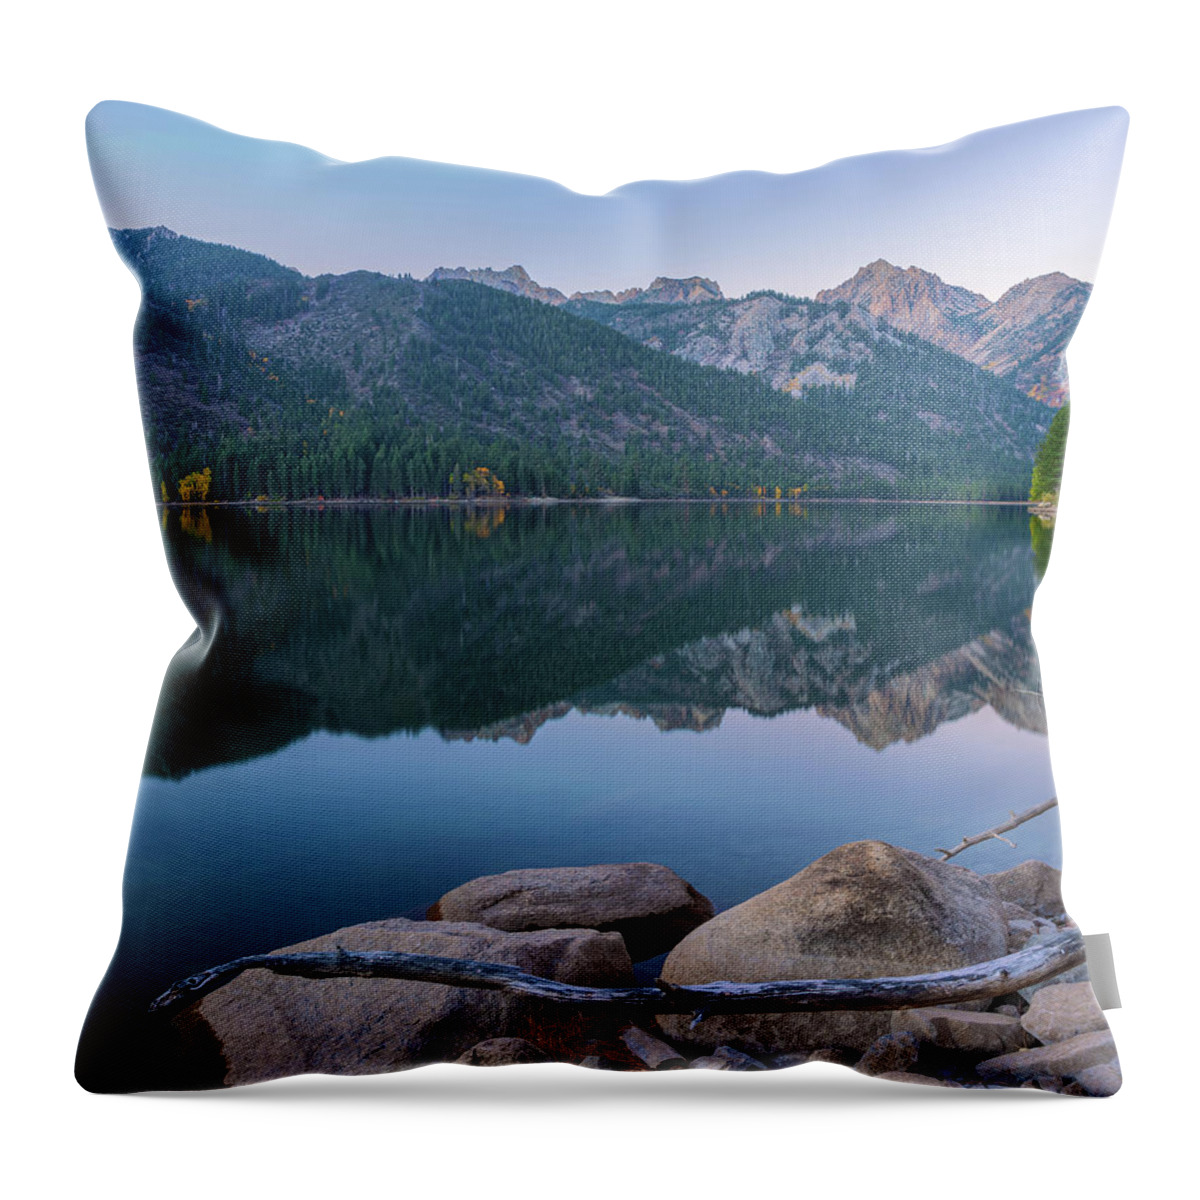 Eastern Sierra Nevada Mountains Throw Pillow featuring the photograph Twin Lake Reflection by Jonathan Nguyen